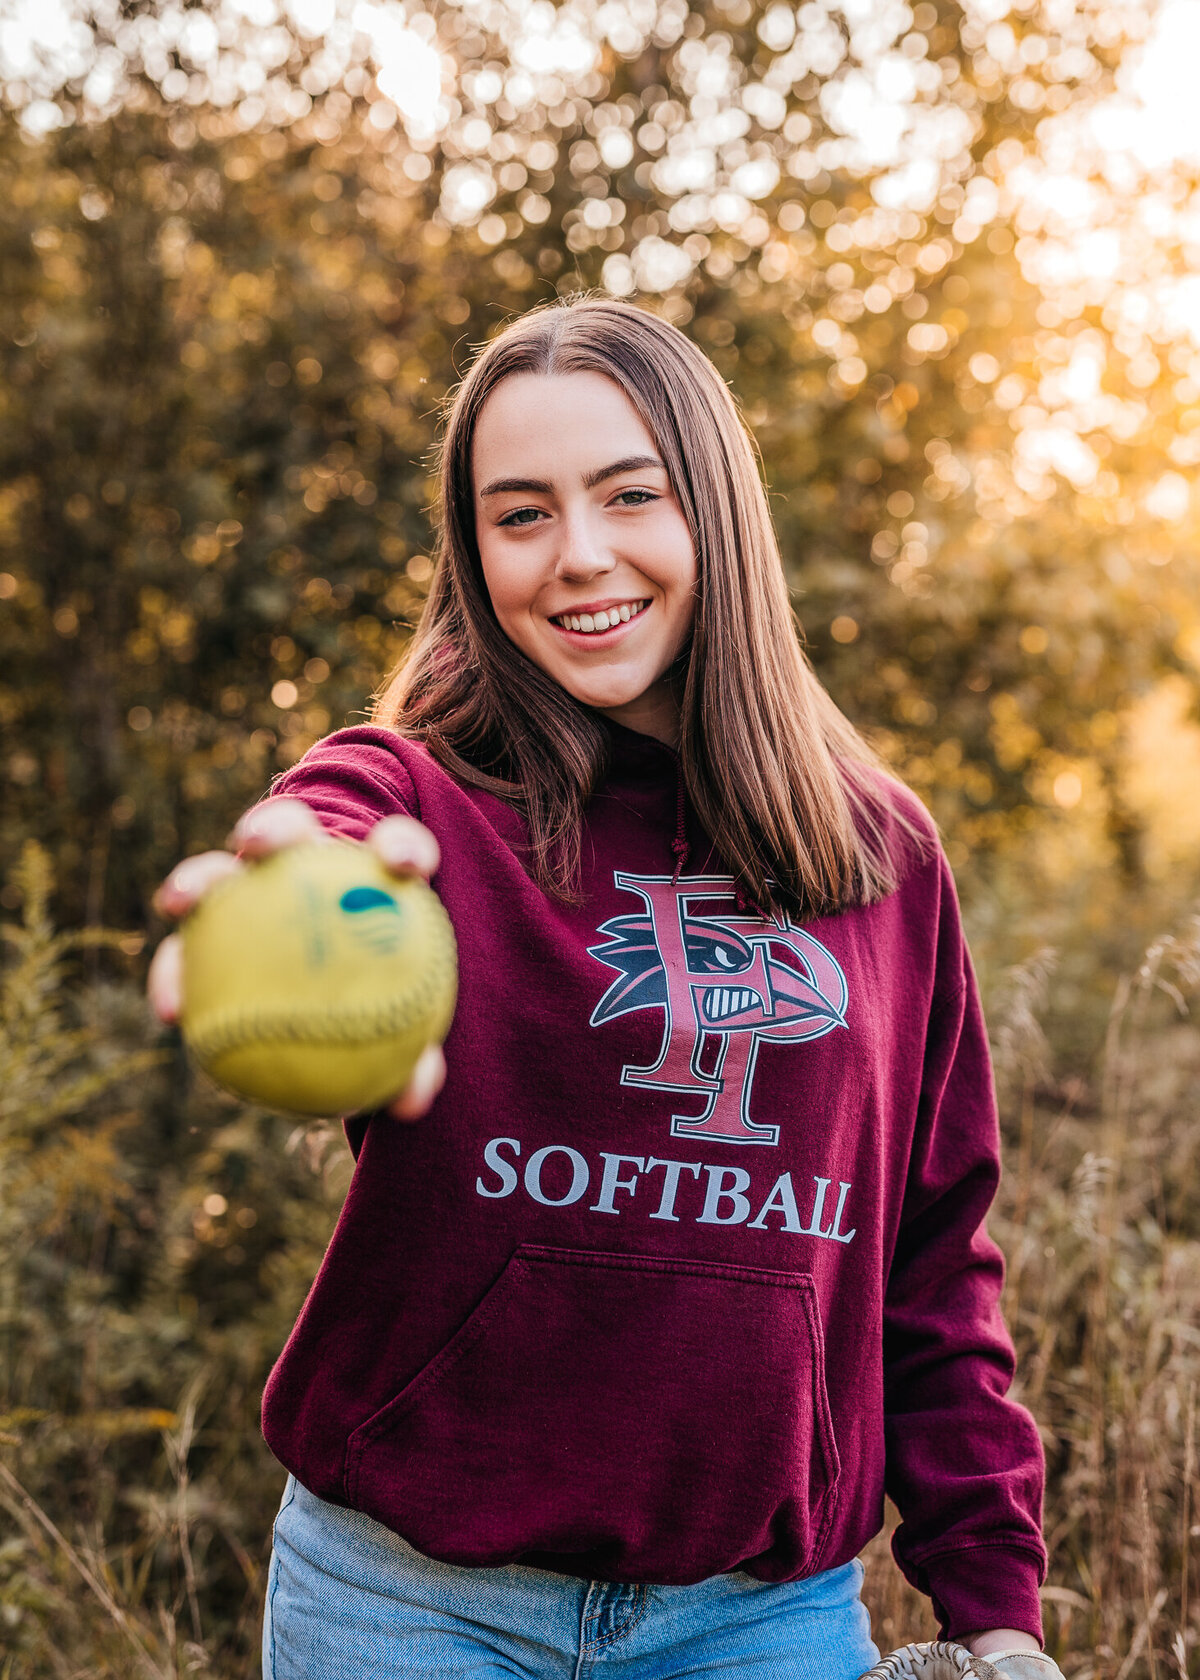 Softball player in audubon center in concord NH by lisa smith photography